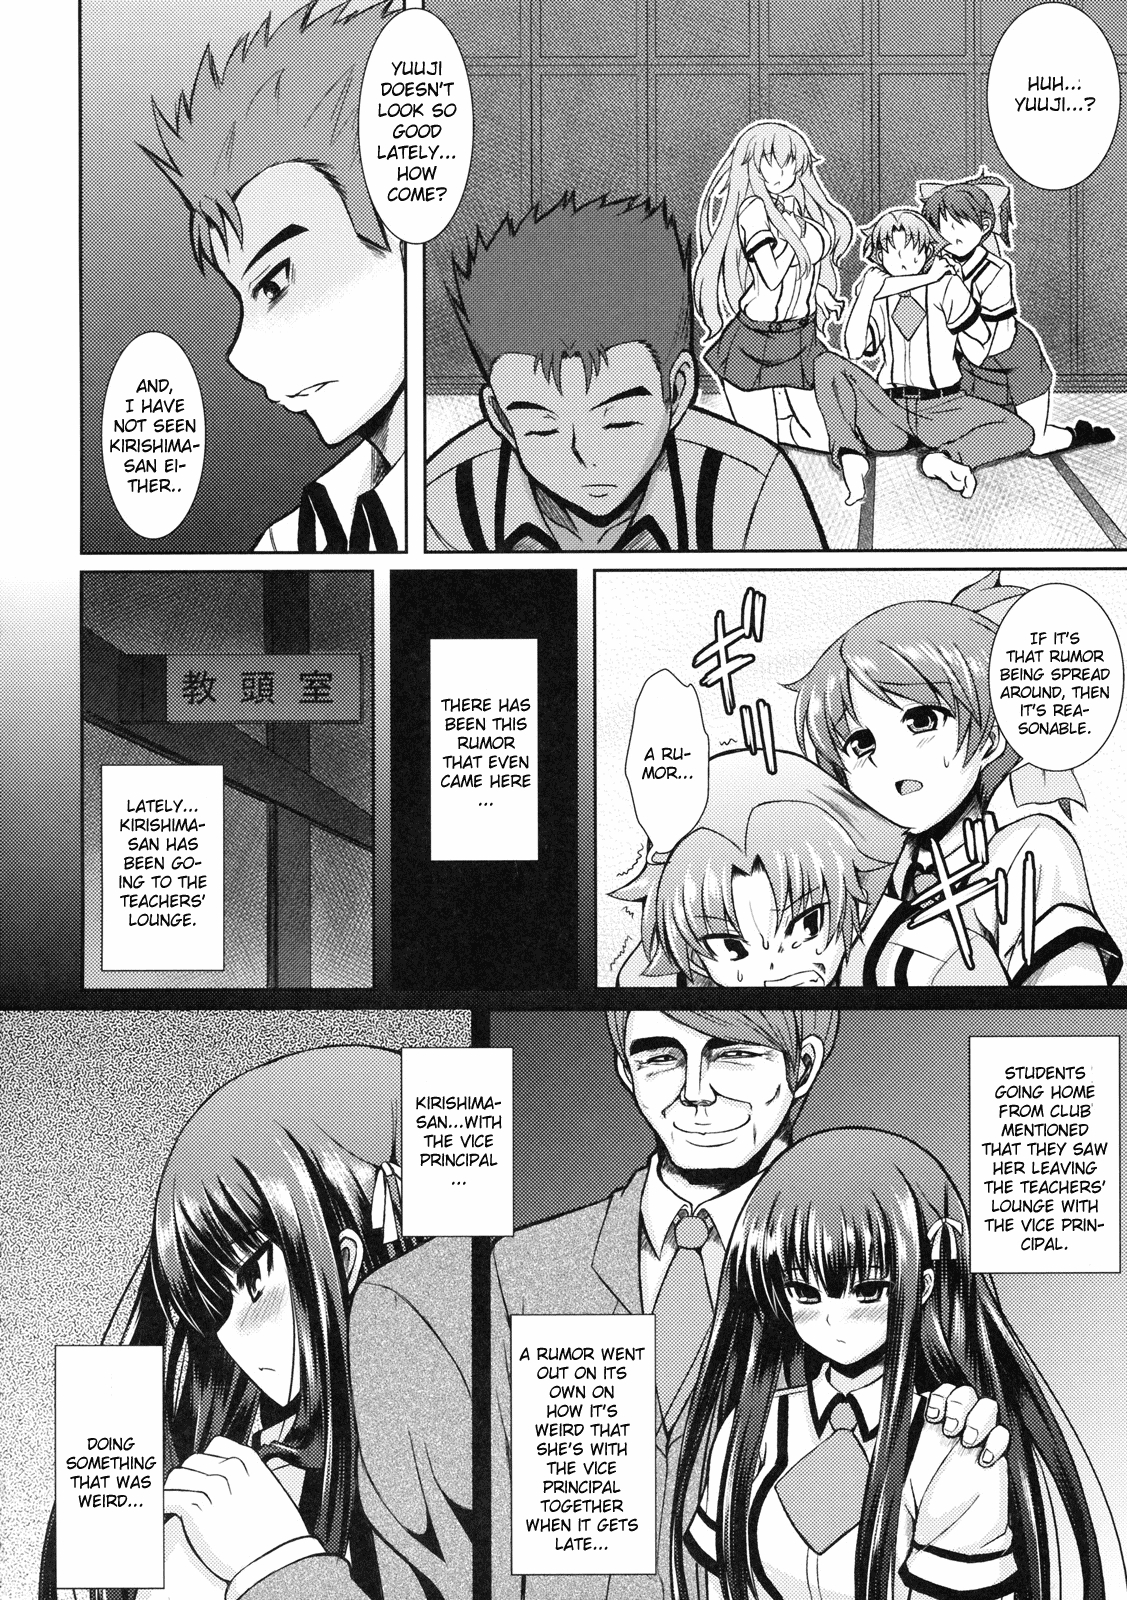 (COMIC1☆4) [PTD (Tatsuhiko)] Iron finger from hell (Baka to Test to Shoukanju) [English] [One of a Kind Productions] 2